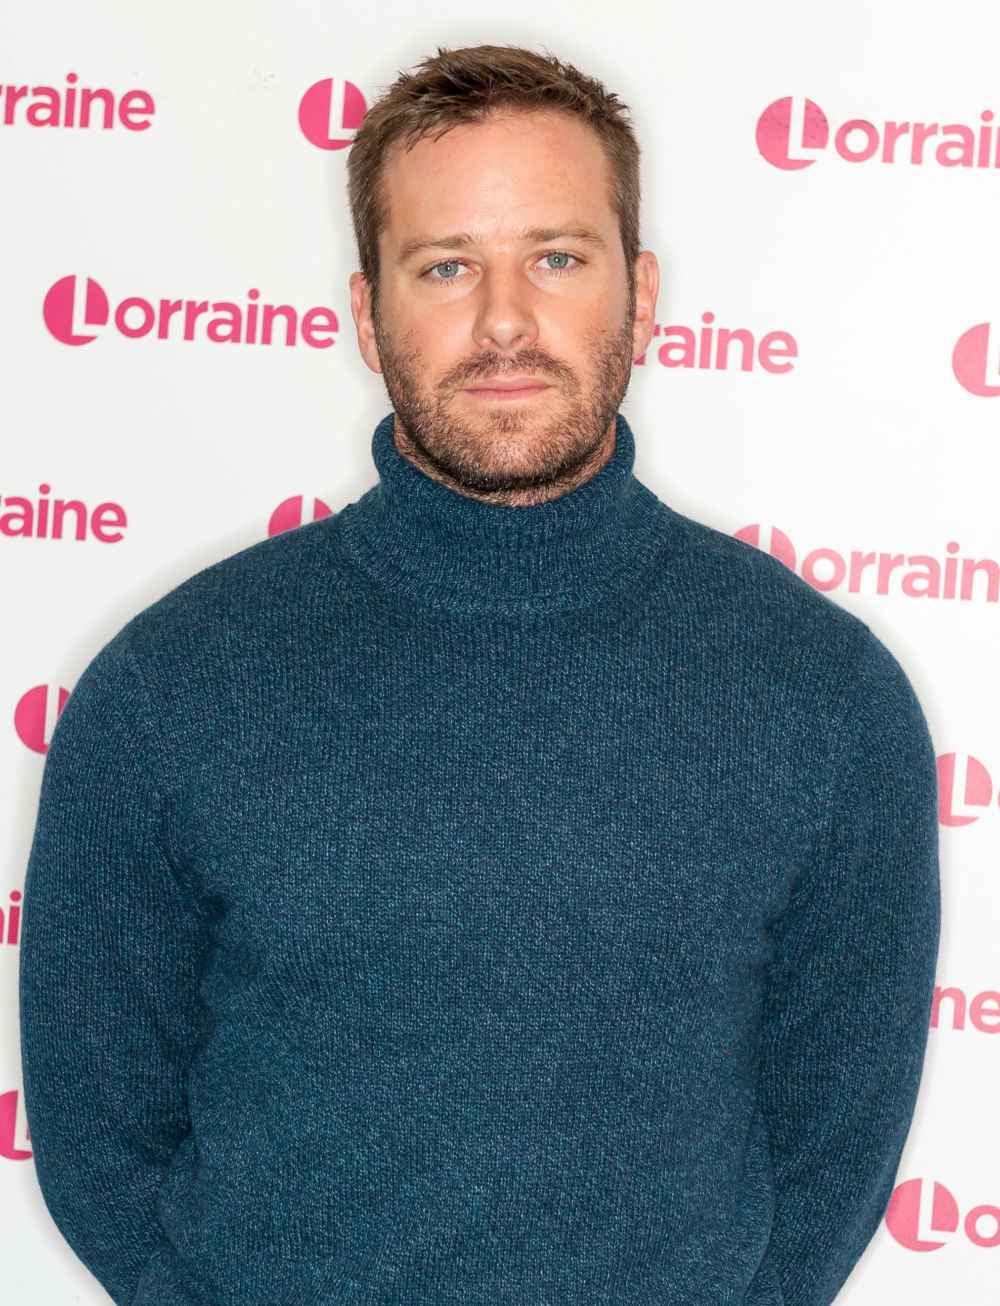 Armie Hammer Has Been Working in Construction Amid Divorce